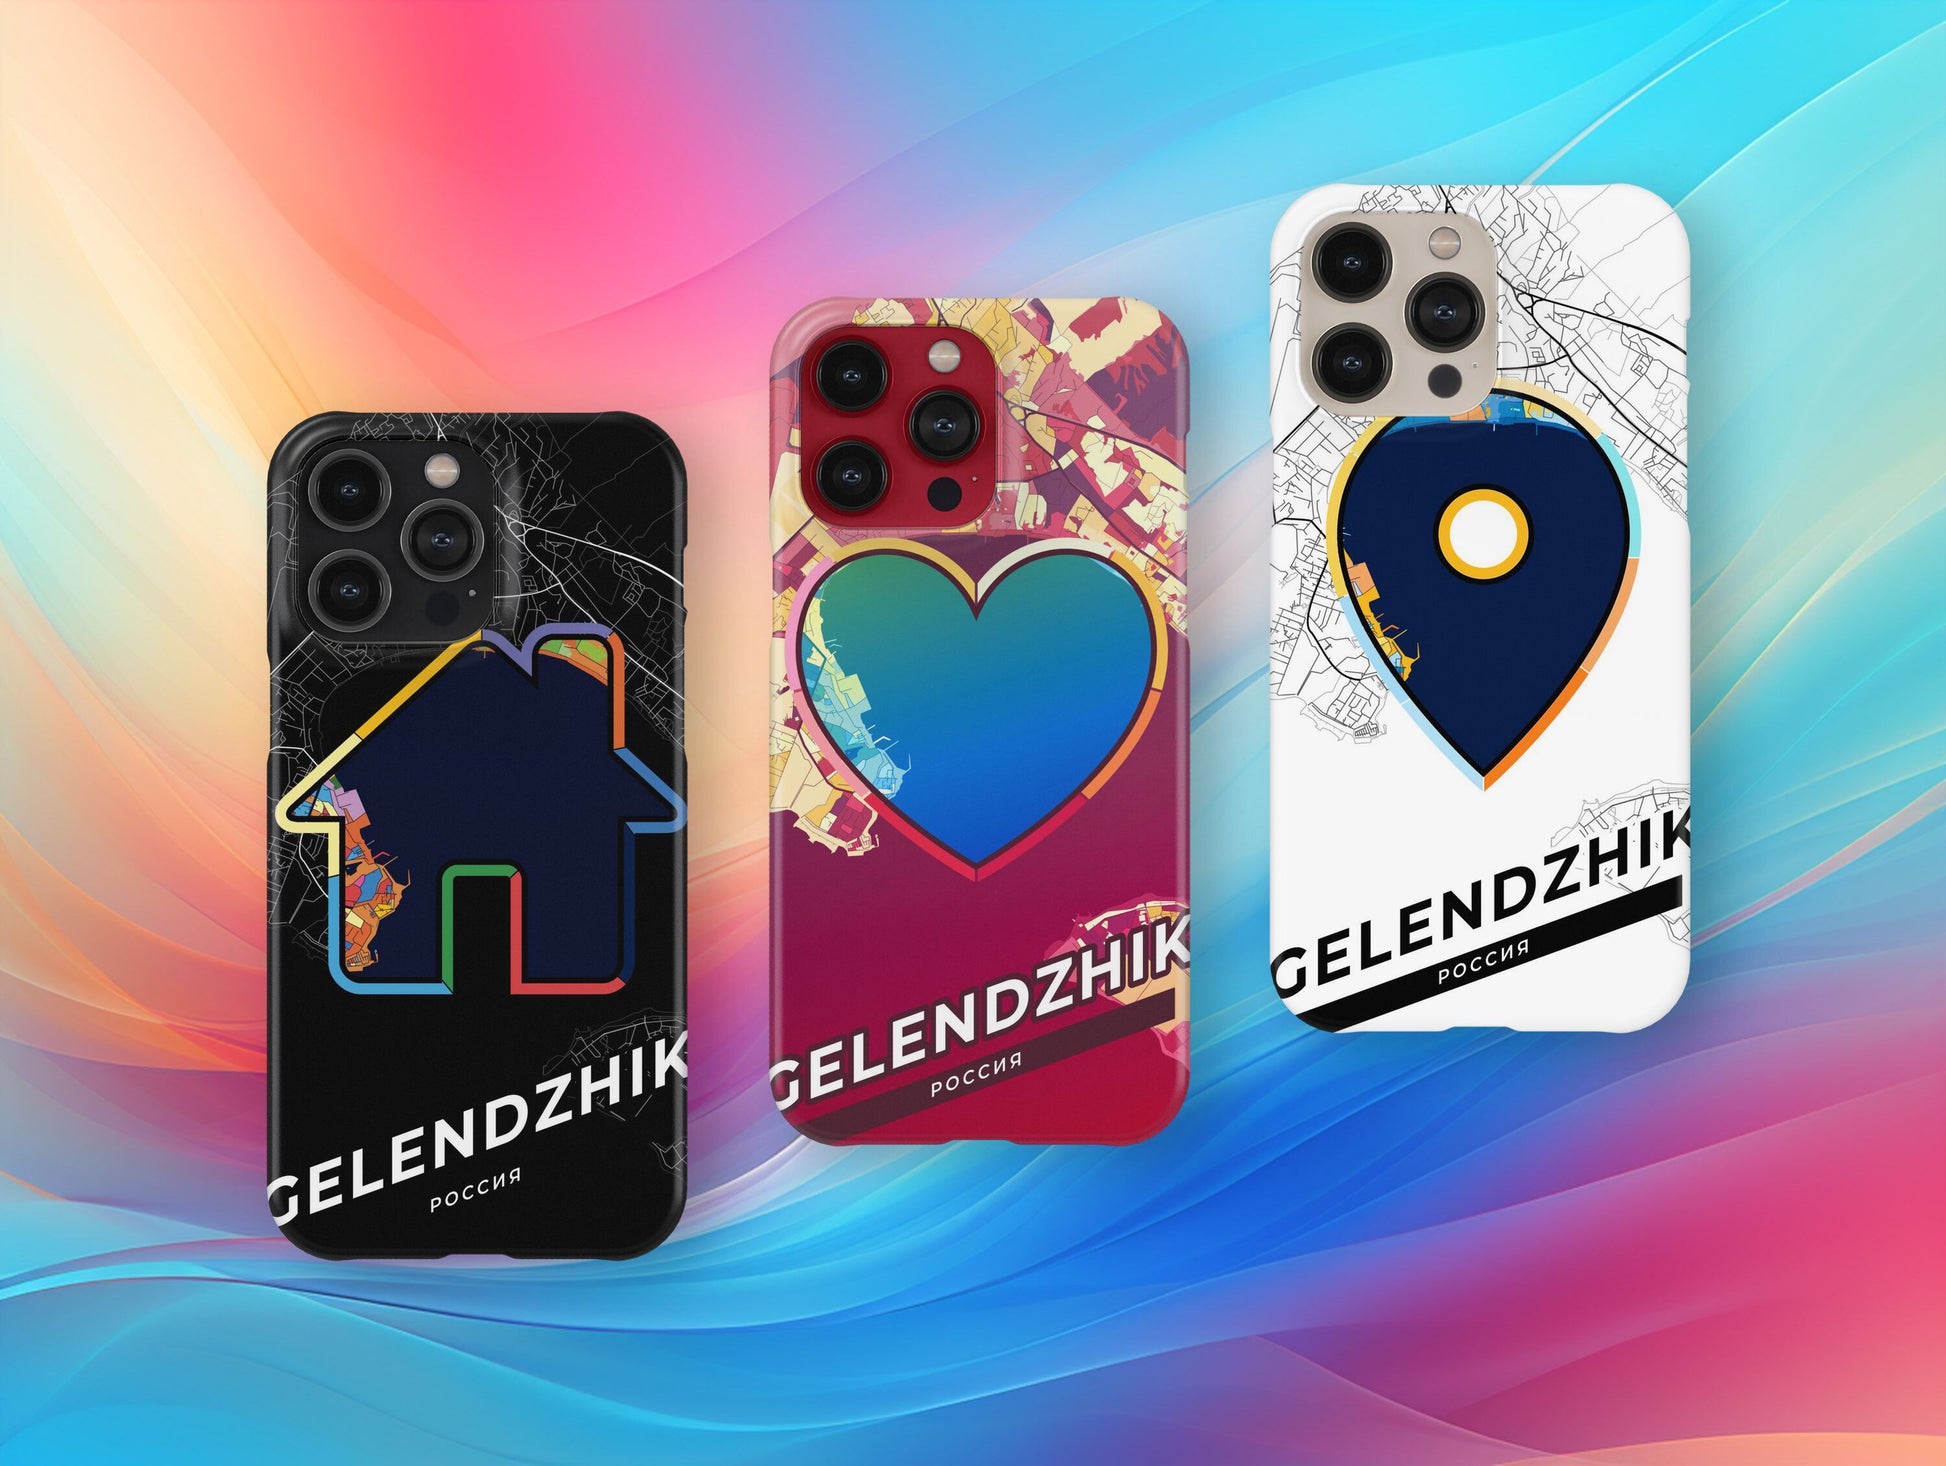 Gelendzhik Russia slim phone case with colorful icon. Birthday, wedding or housewarming gift. Couple match cases.